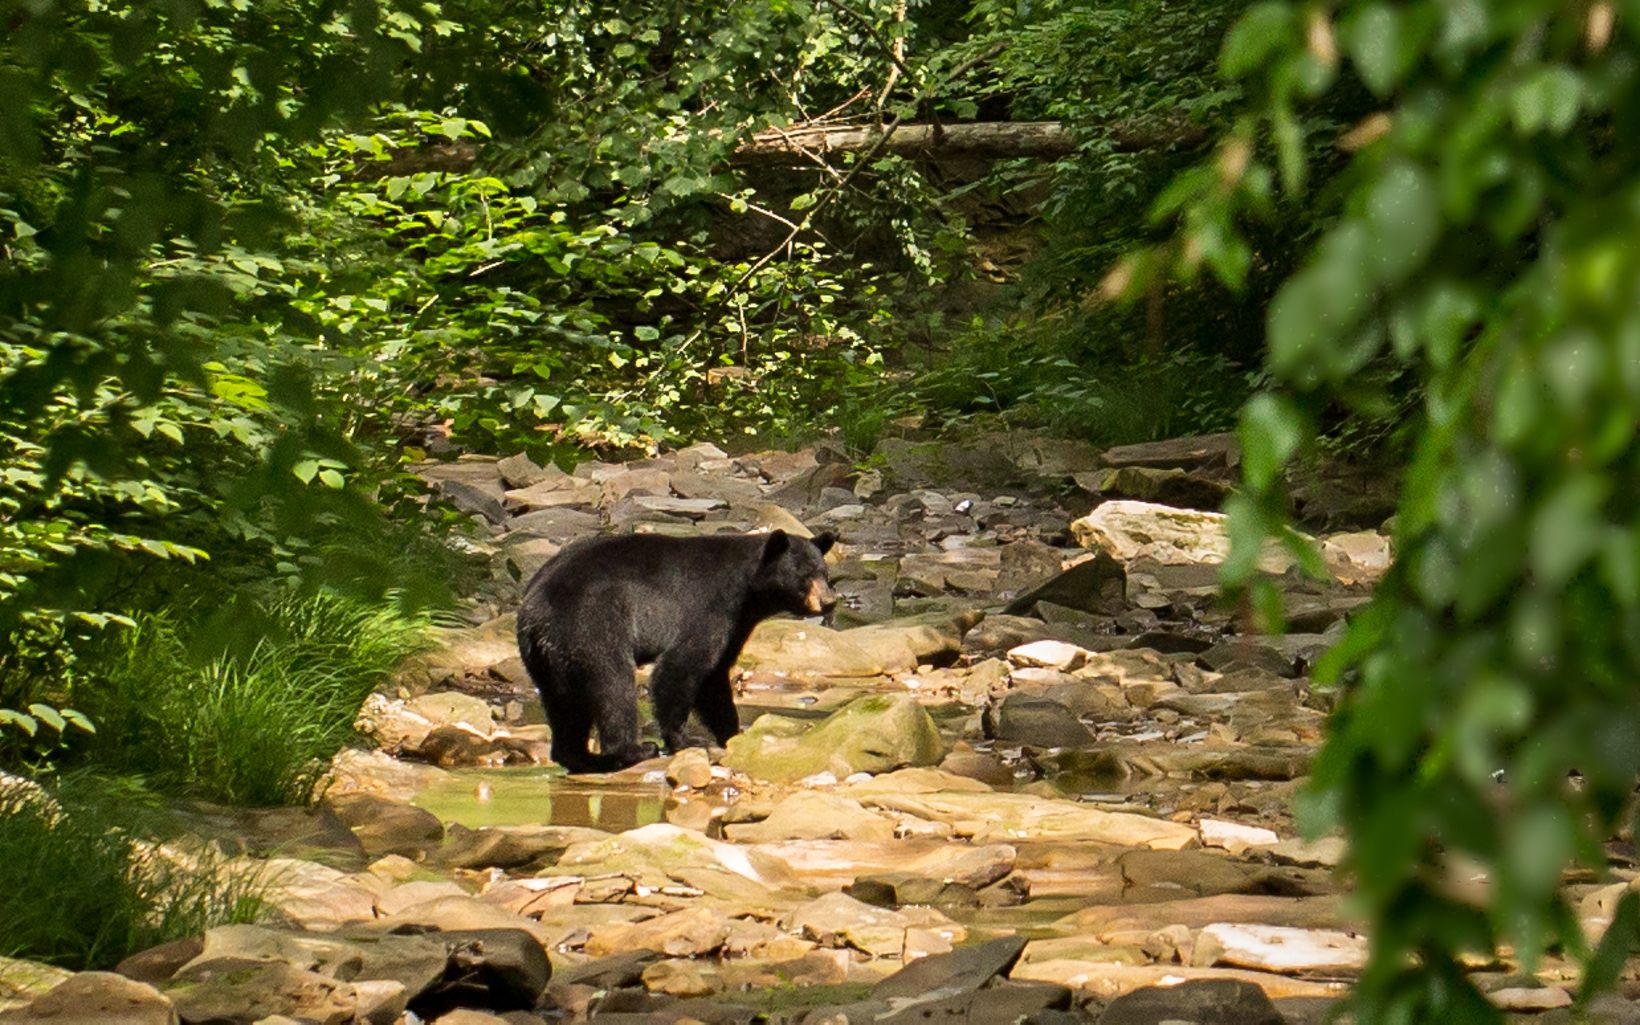 A black bear standing in a rocky stream surrounded by forest. 